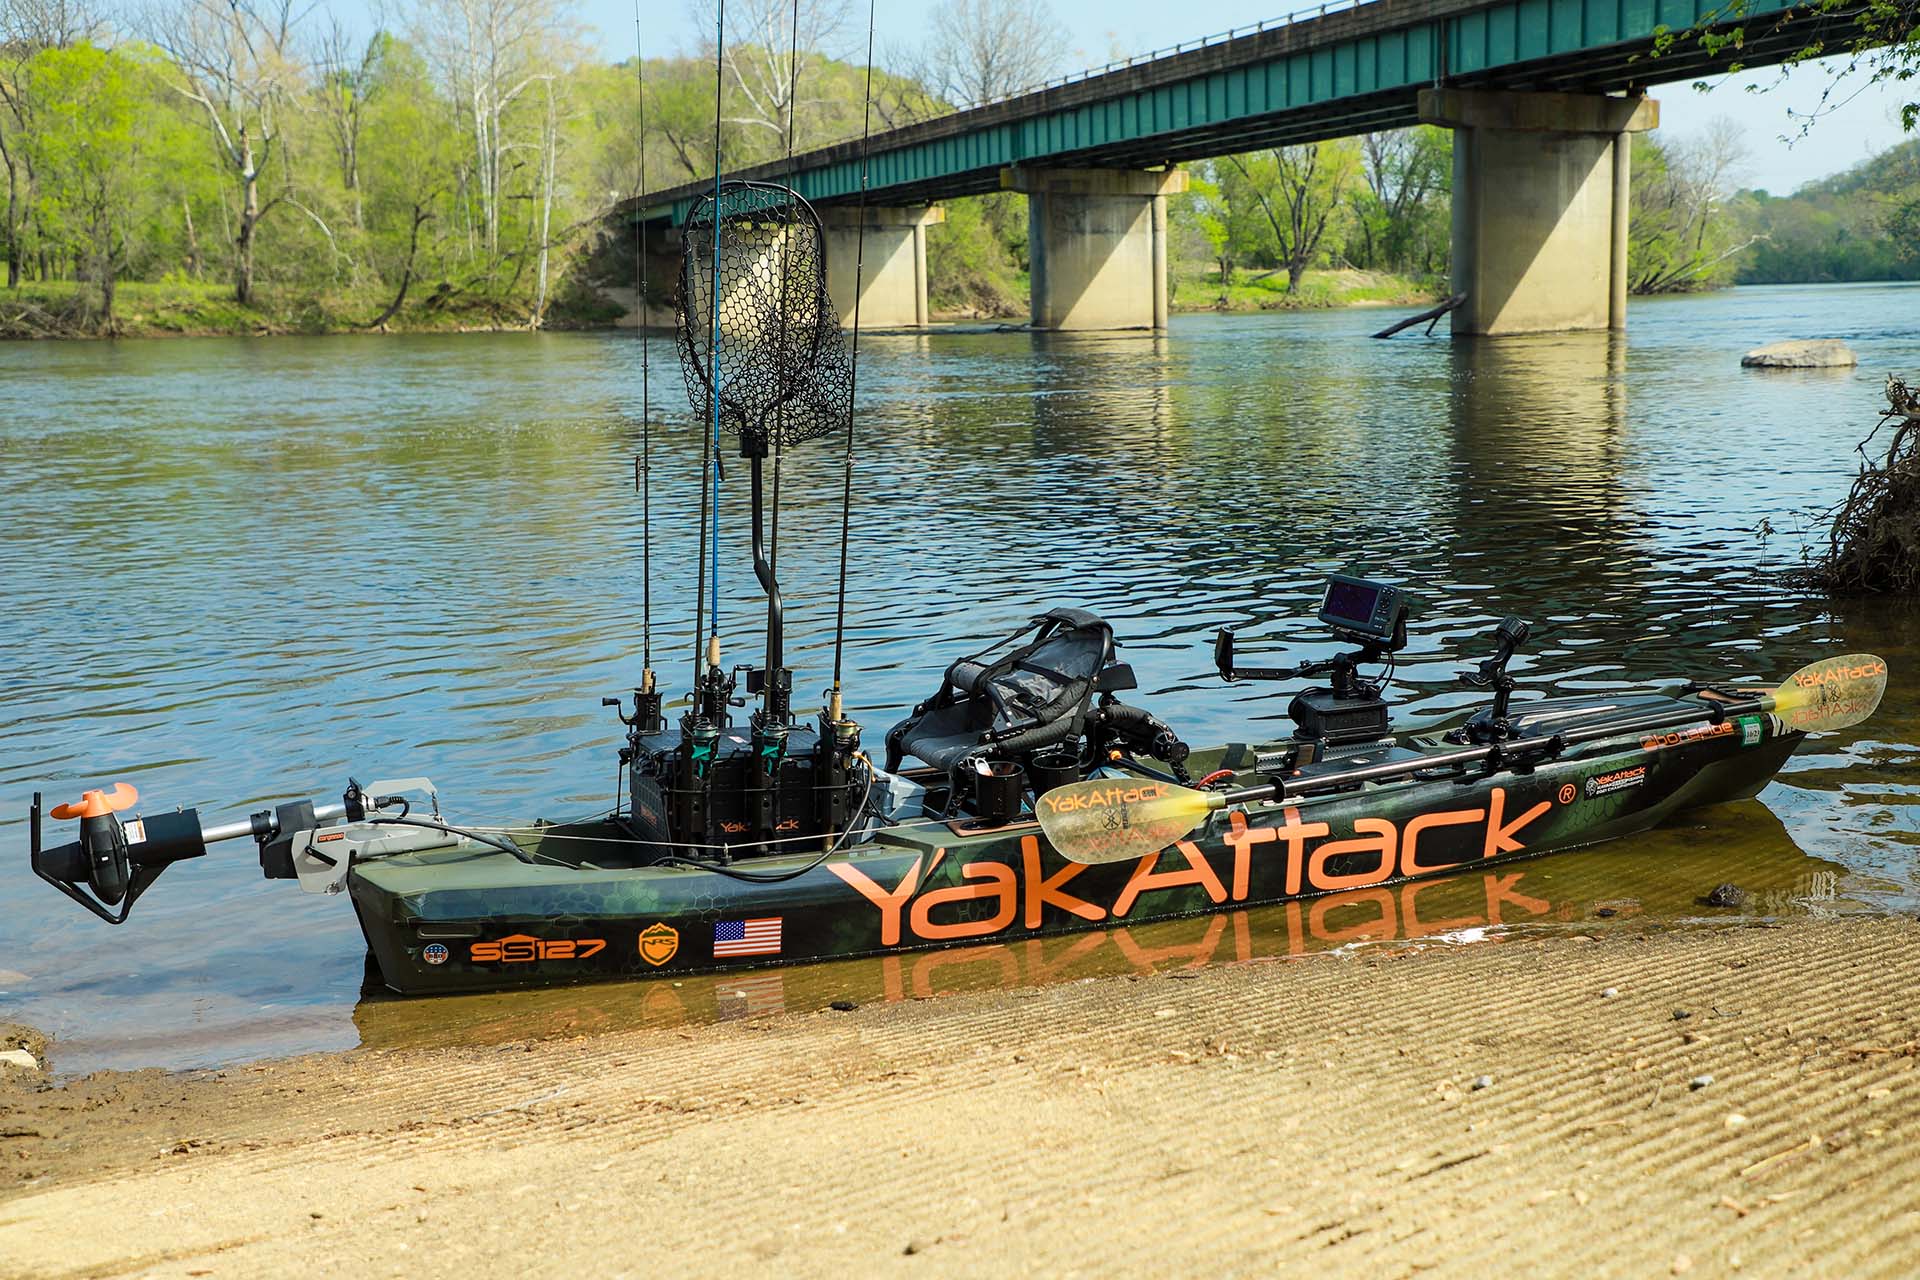 YakAttack® - USA Made Fishing Gear and Accessories for Kayaks and